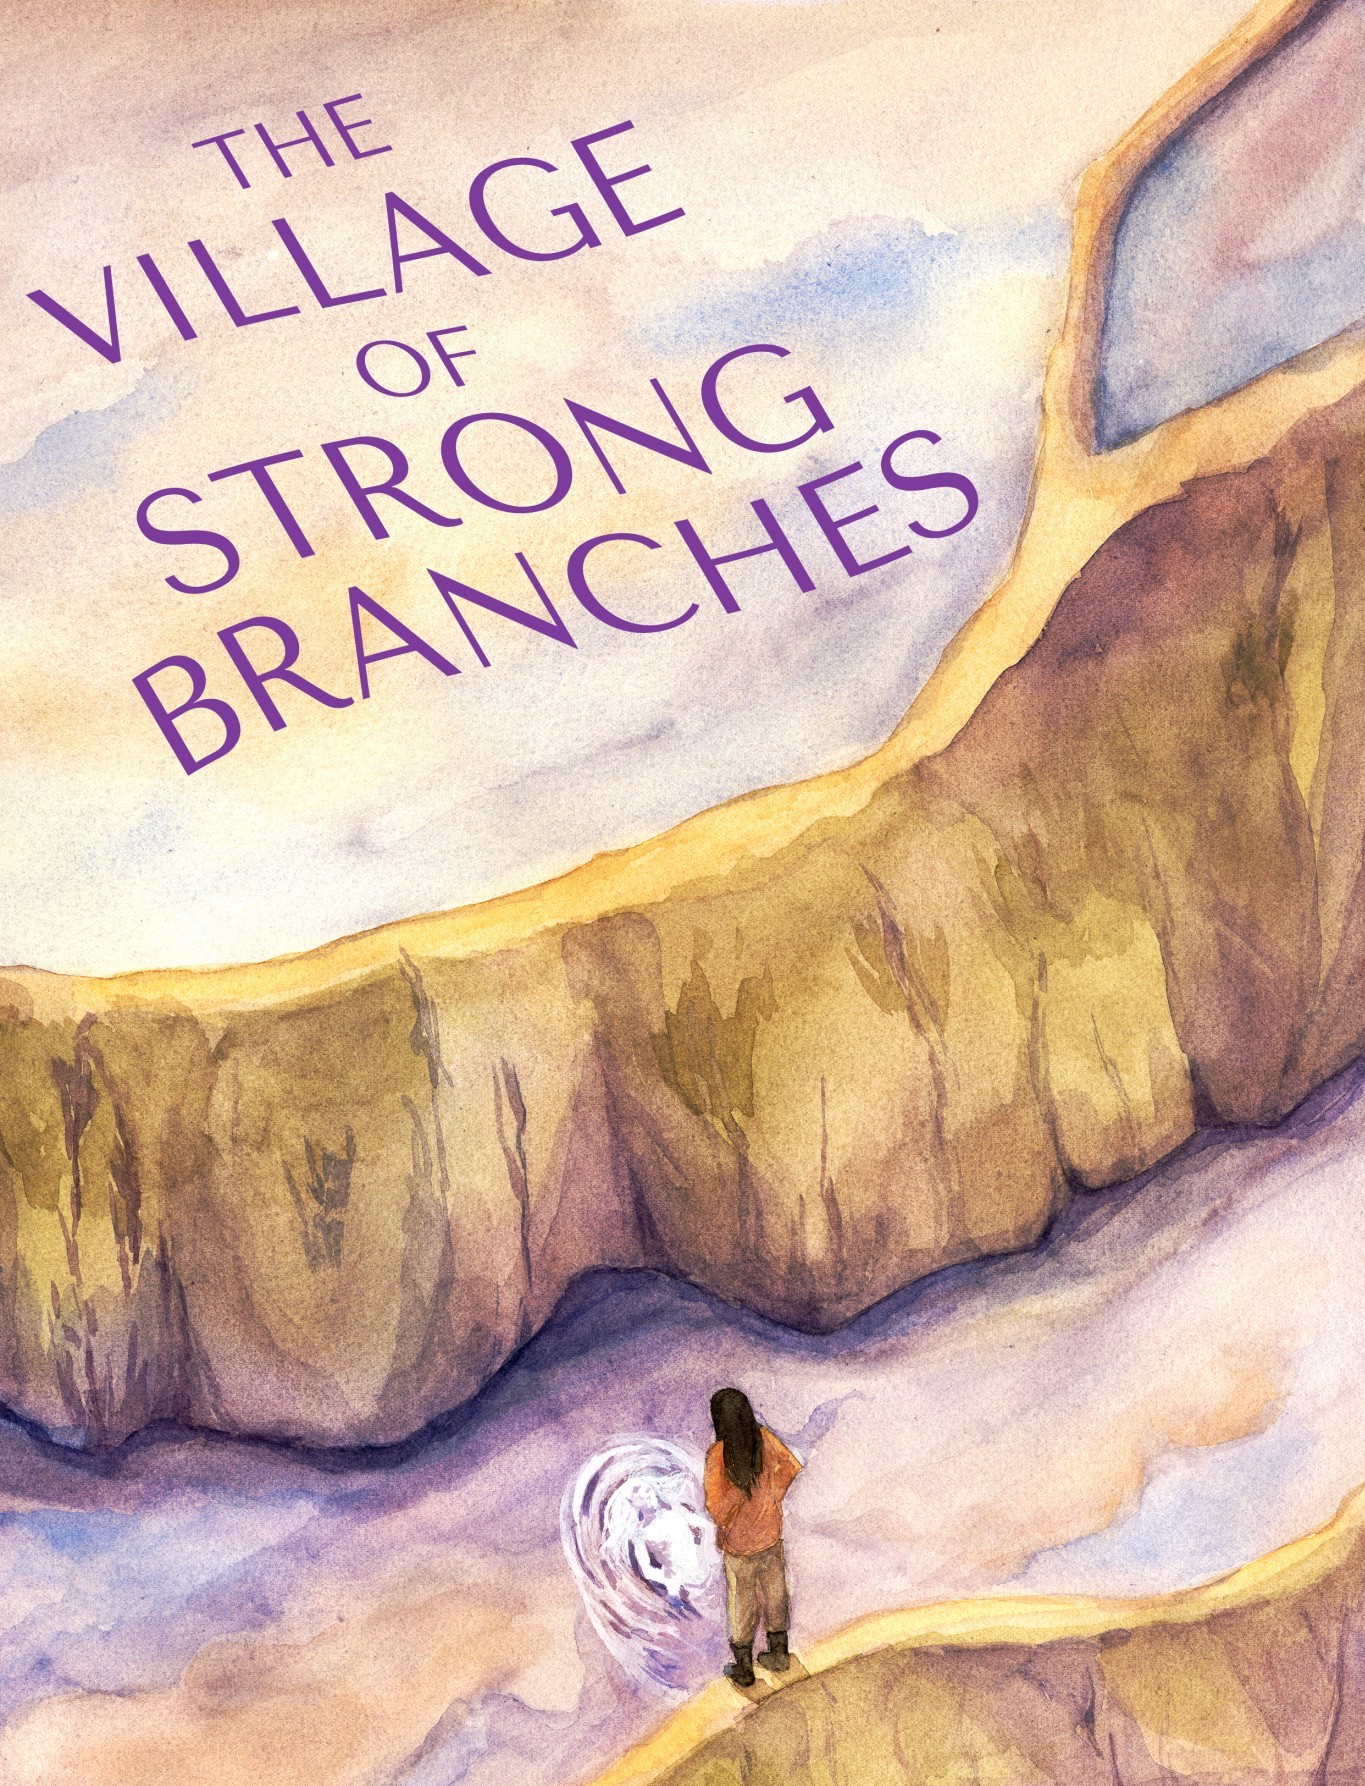 Book cover for Village of Strong Branches. A woman stands in a paddy on a terraced slope as a ghost comes out of the ground.